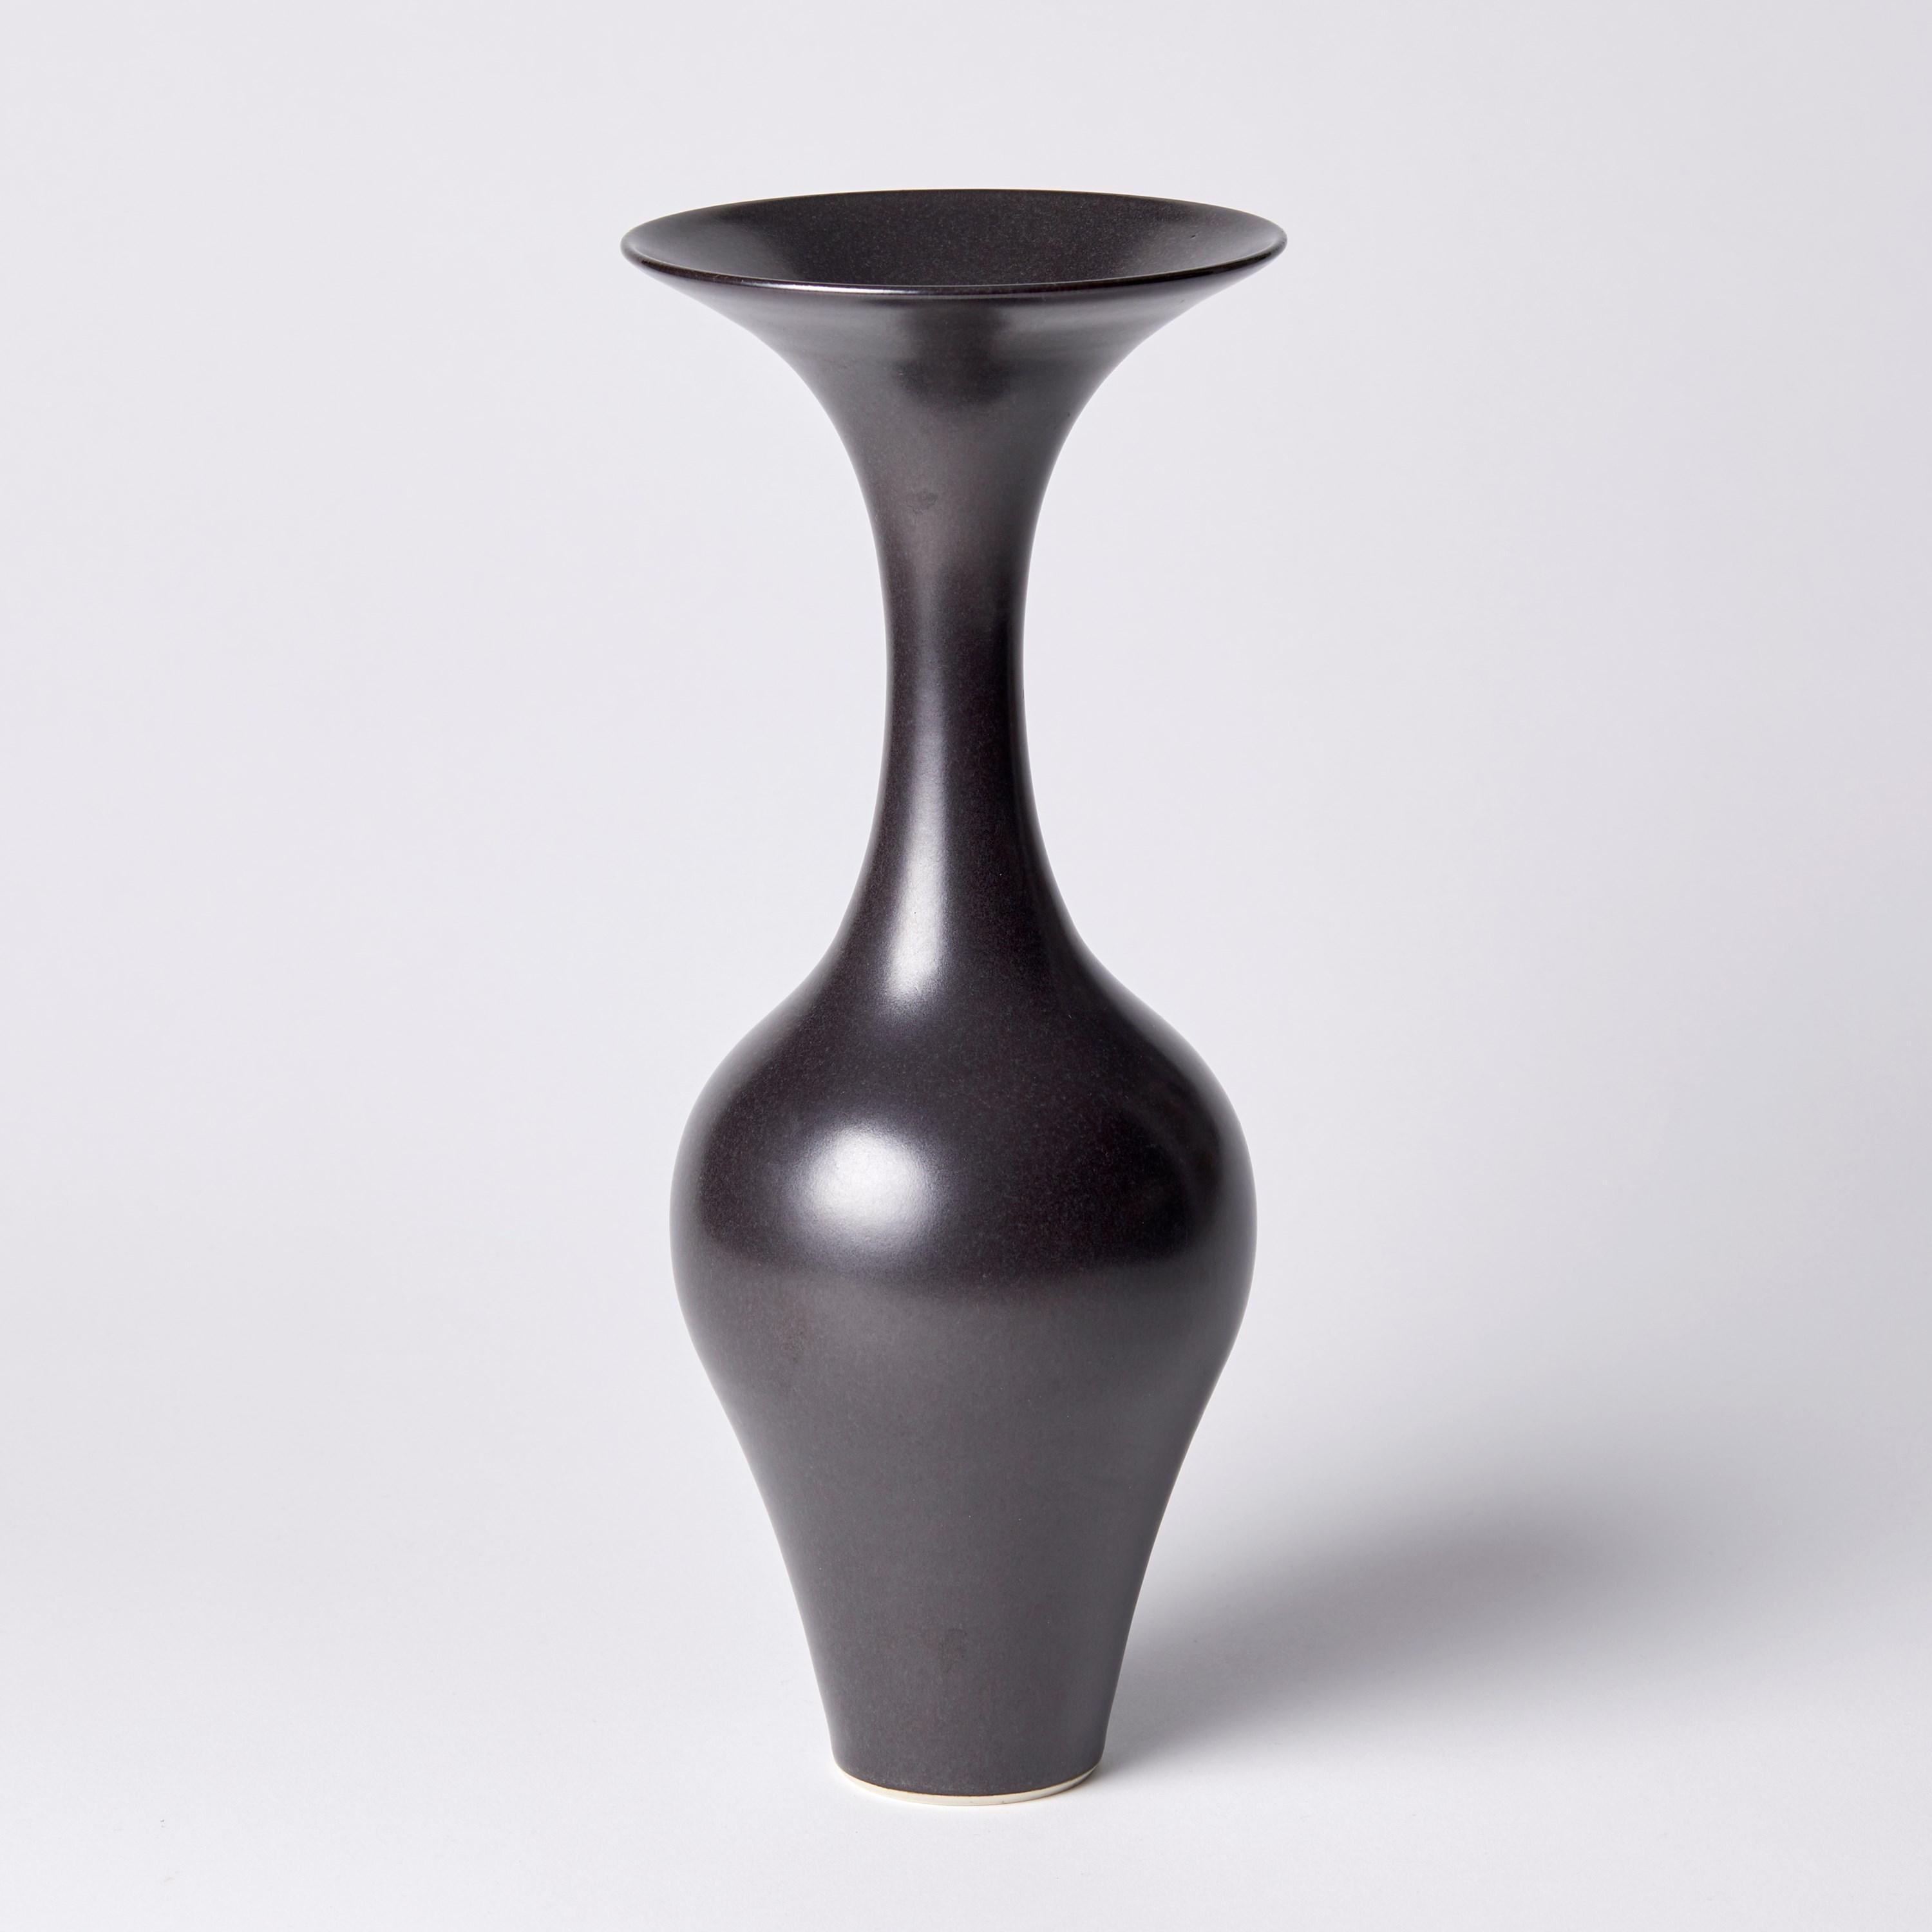 ‘Black Classic Vase I’ is a unique porcelain sculptural vessel by the British artist, Vivienne Foley, which has been released from her own personal archive of artworks. 

Vivienne Foley is based in Gloucestershire where she produces exquisite